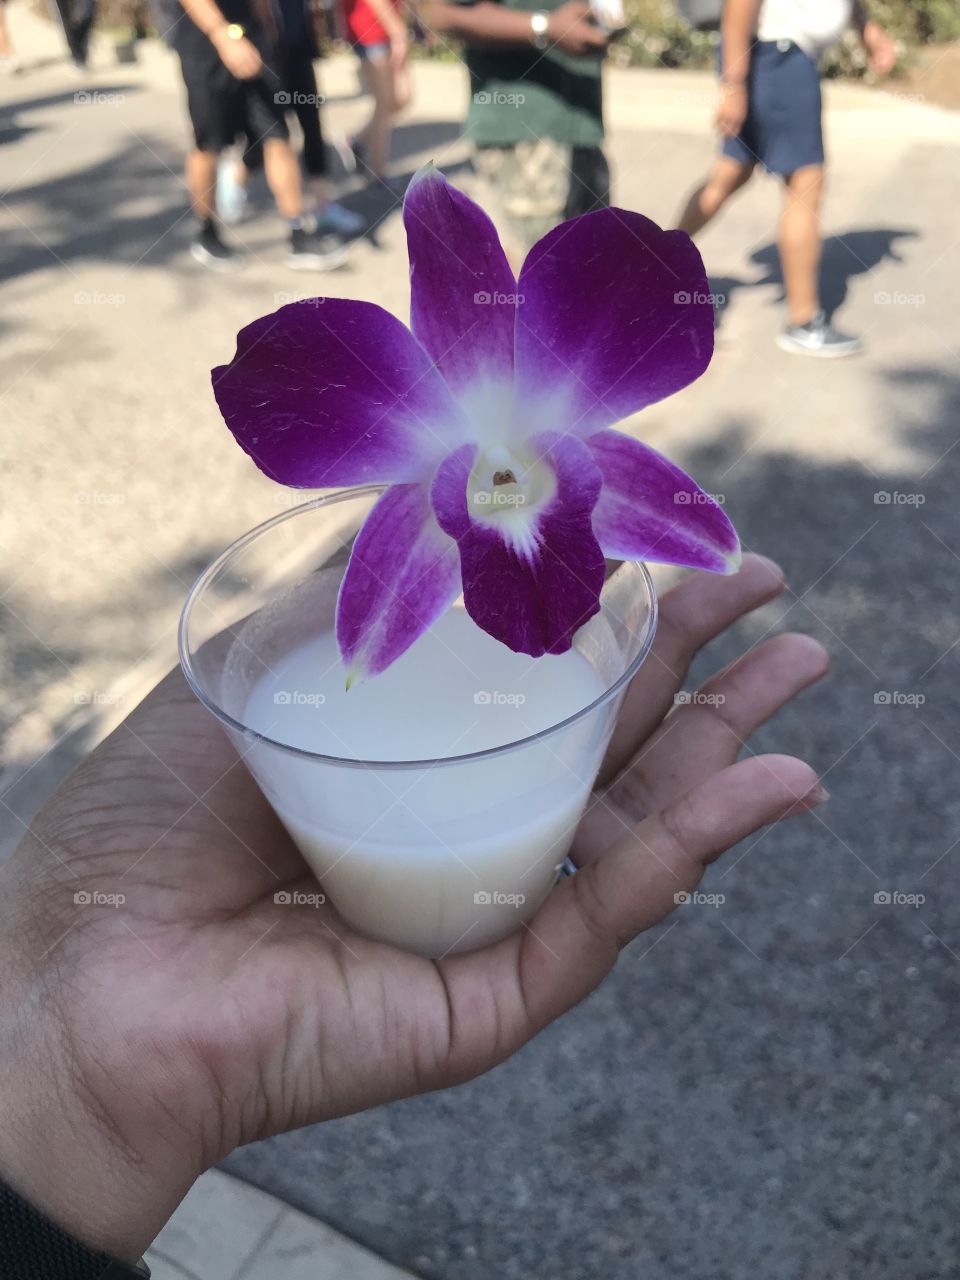 Loved drink at Sea World San Diego. Eat the flower then take the saki shot! 